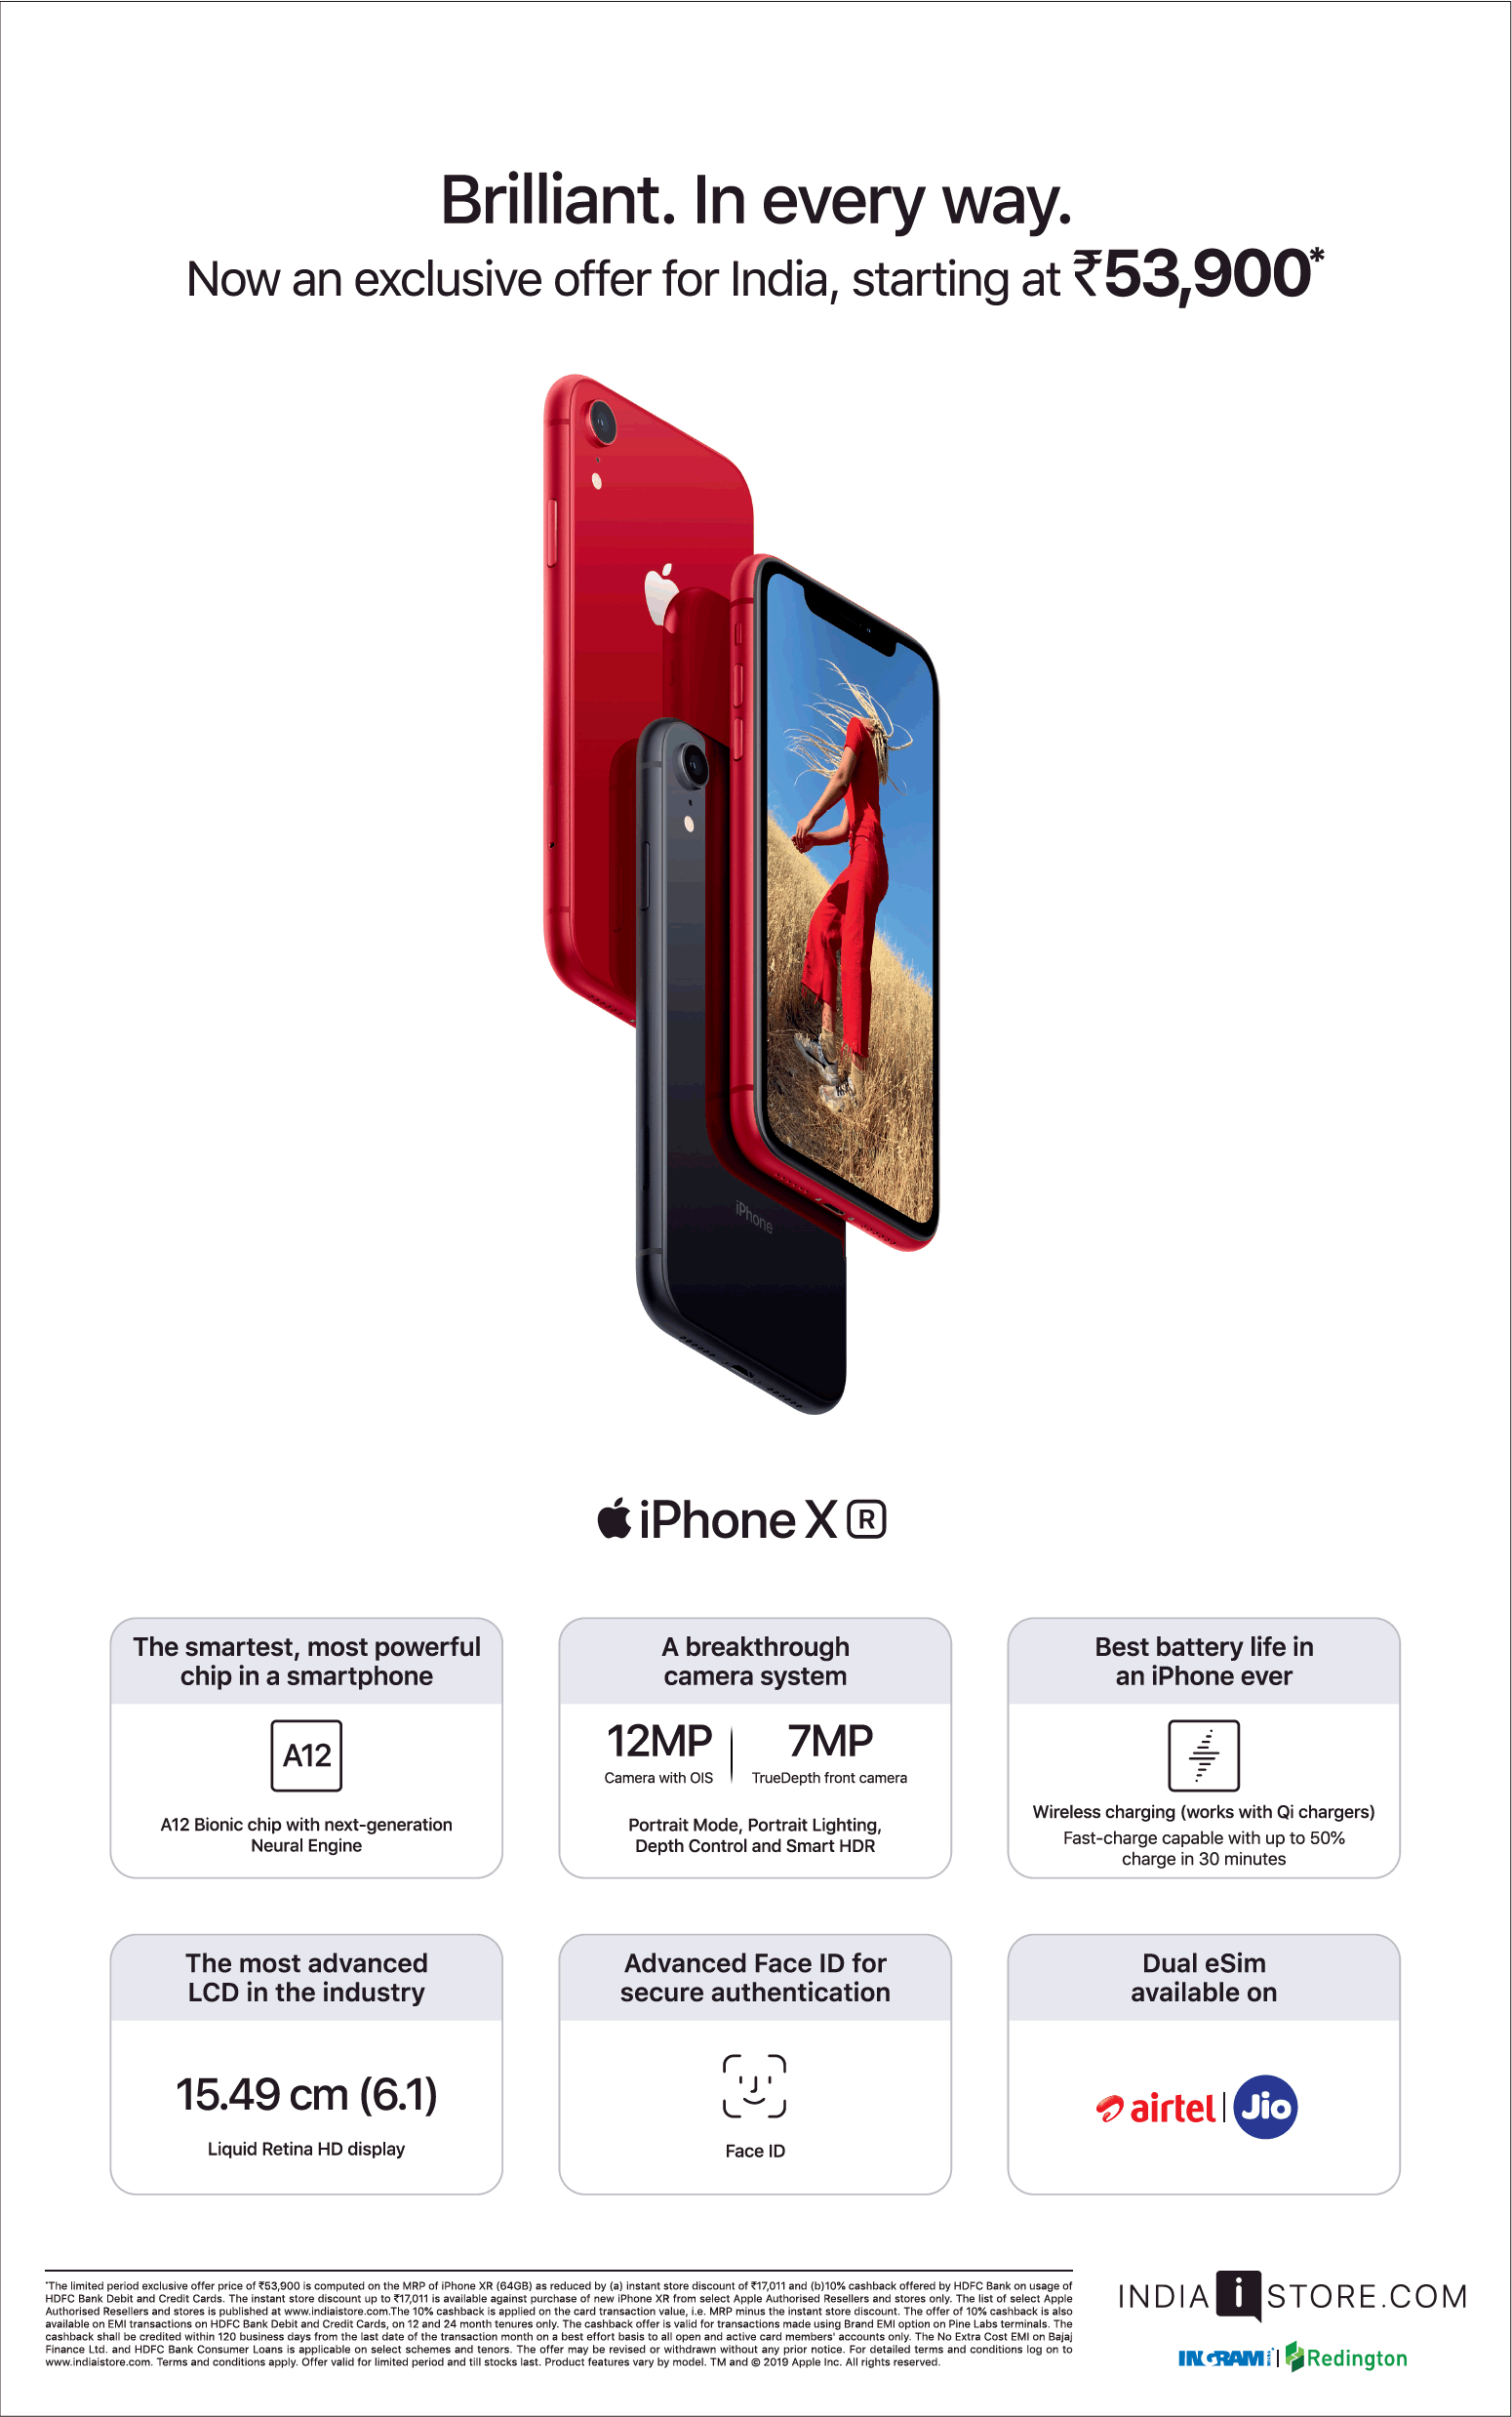 apple-iphone-xr-now-an-exclusive-offer-for-india-starting-at-rs-53990-ad-times-of-india-bangalore-05-04-2019.png